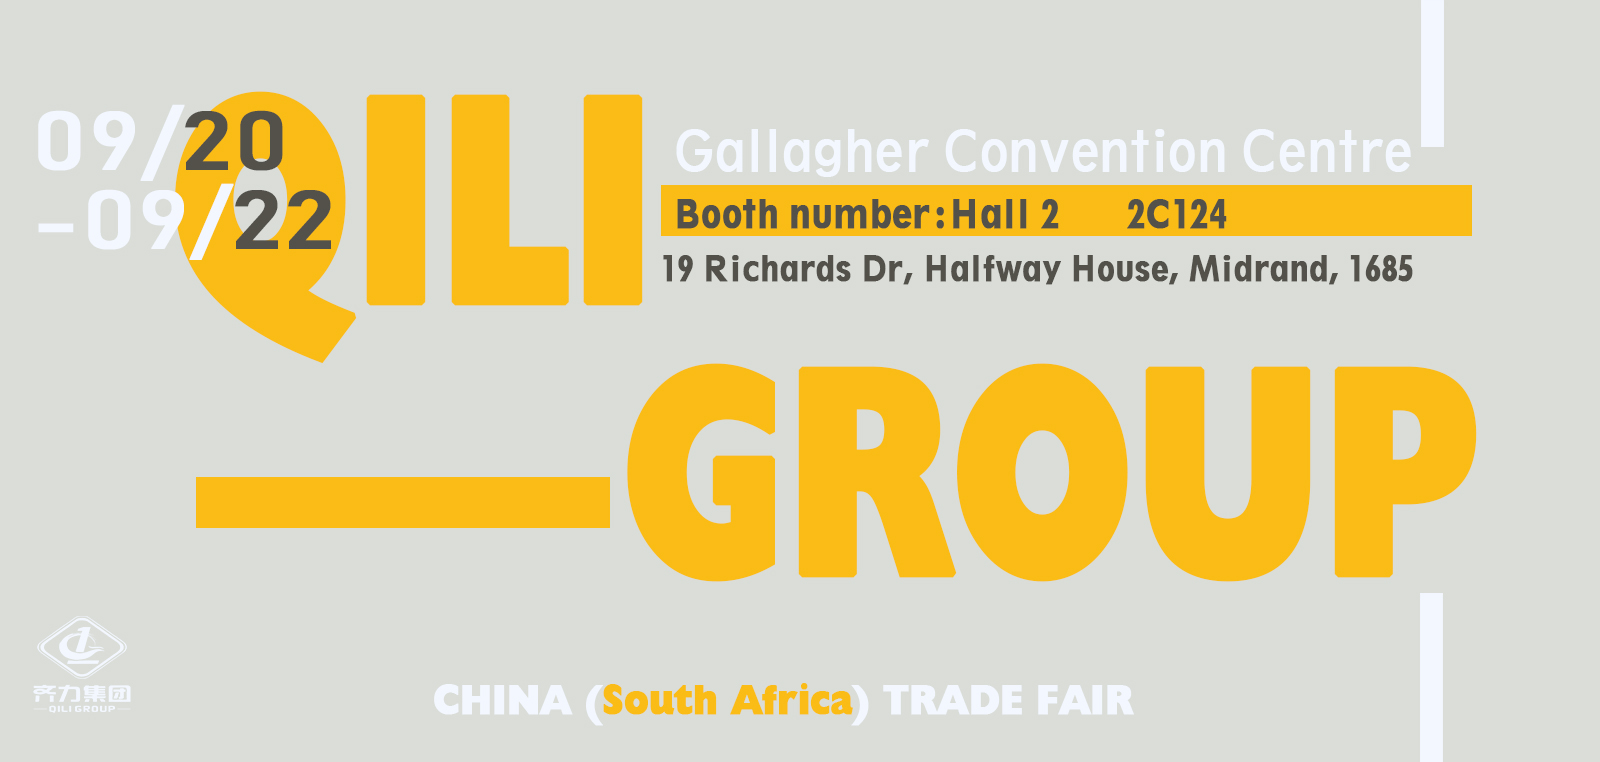 QILI will attend CHINA (South Africa) TRADE FAIR on 9/20-9/23